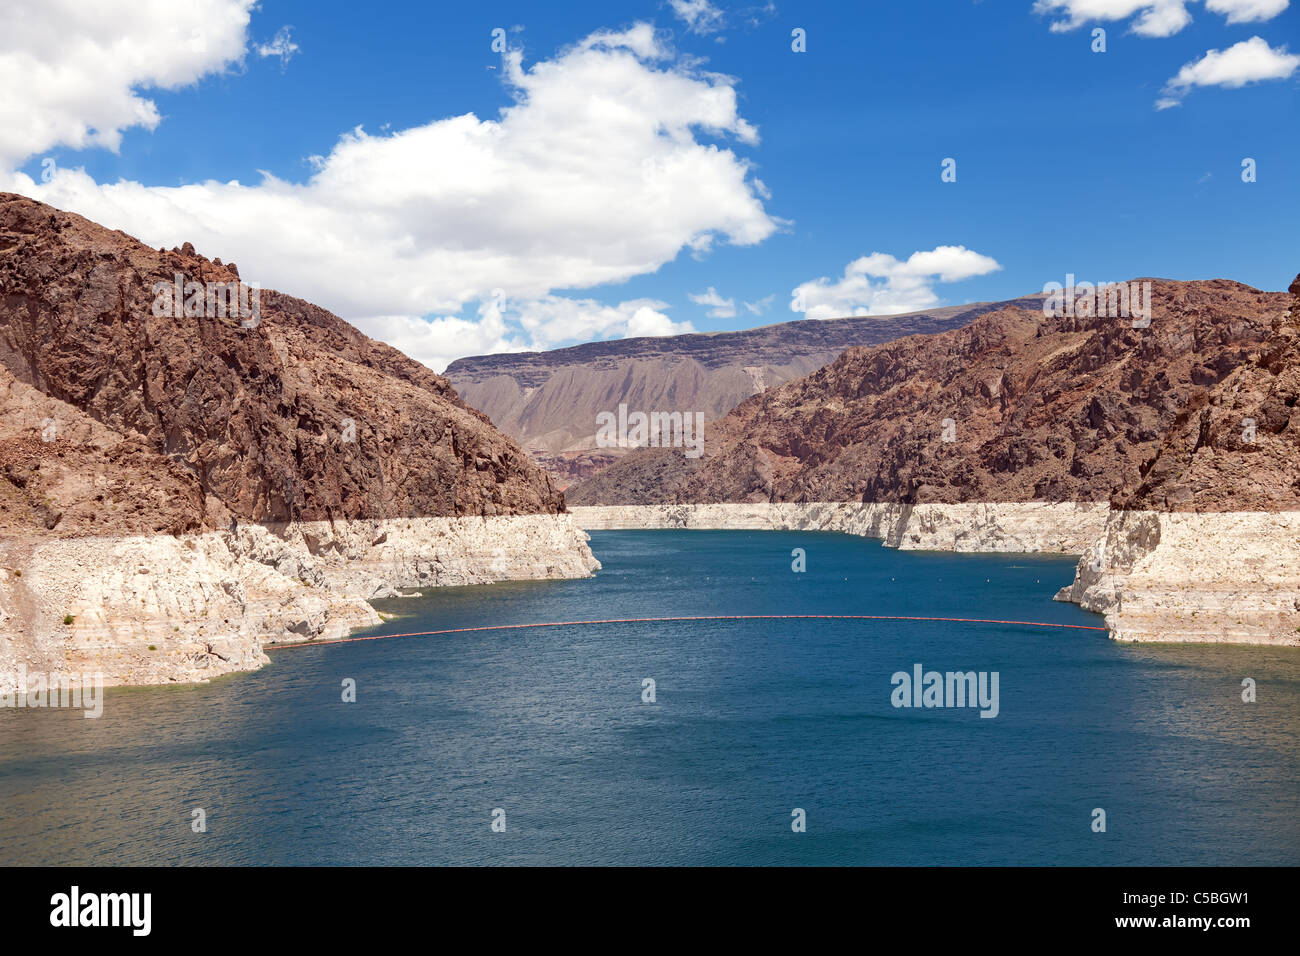 Decreased water level in Black Canyon of Colorado river near Hoover Dam, upstream view Stock Photo